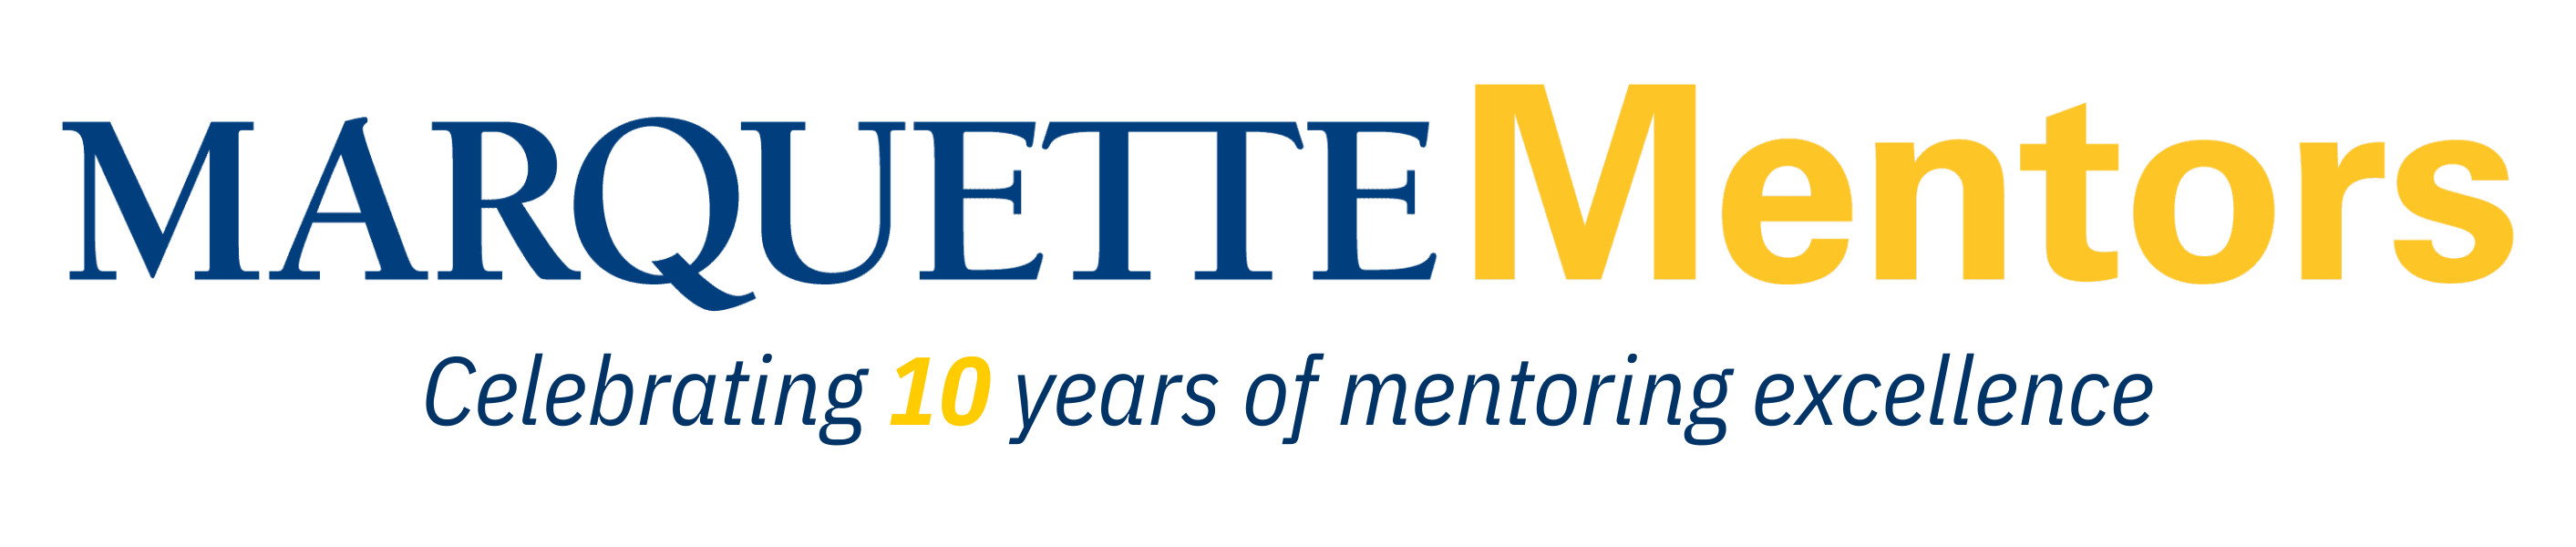 Marquette Mentors; celebrating 10 years of mentoring excellence